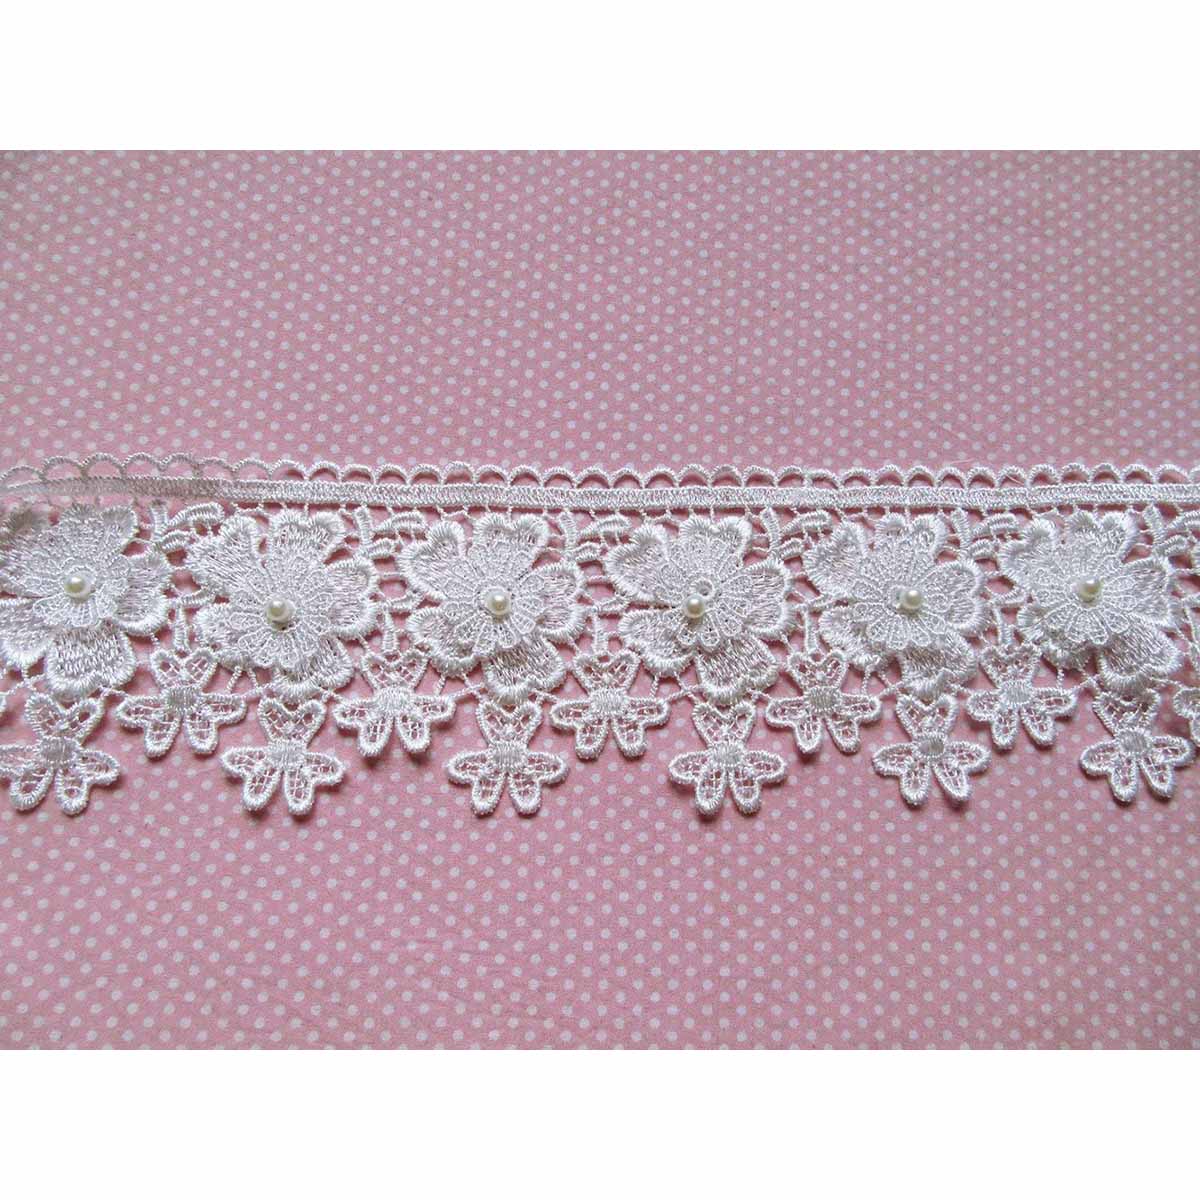 2 Yards Two-layer Flower Lace Trim 3.5″ Wide-White